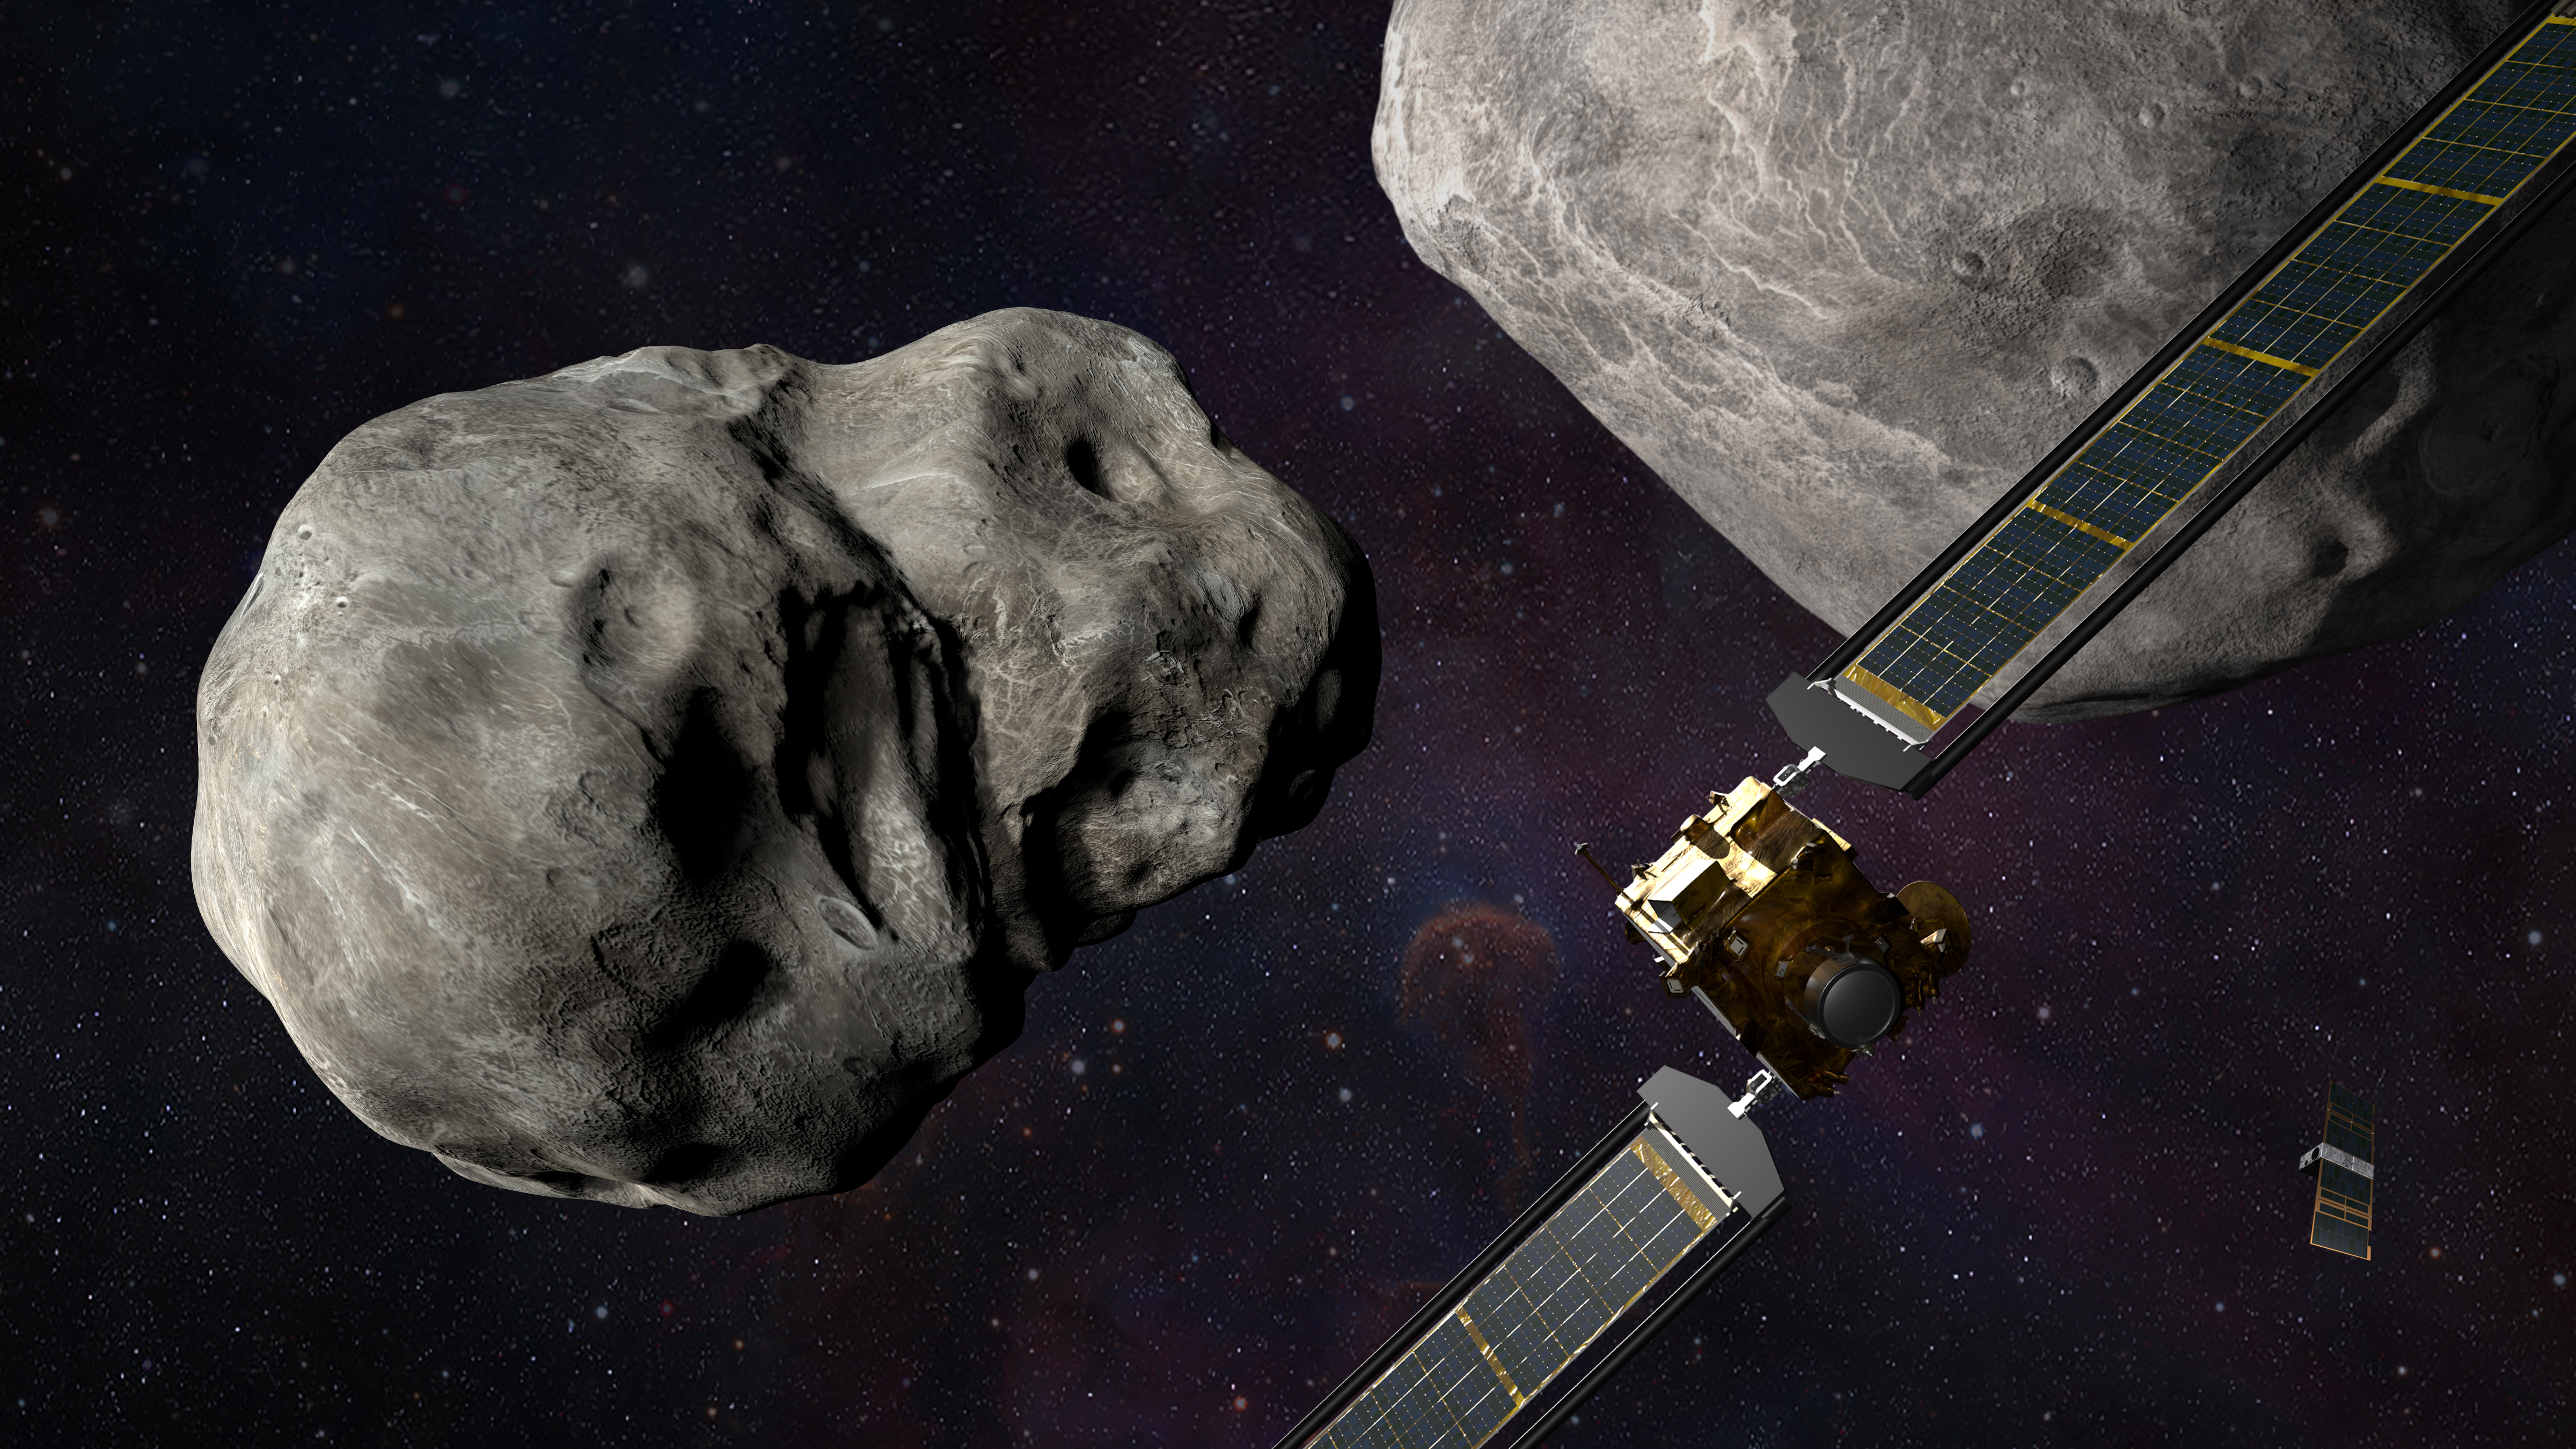 NASA’s DART mission successfully changed asteroid’s
orbit